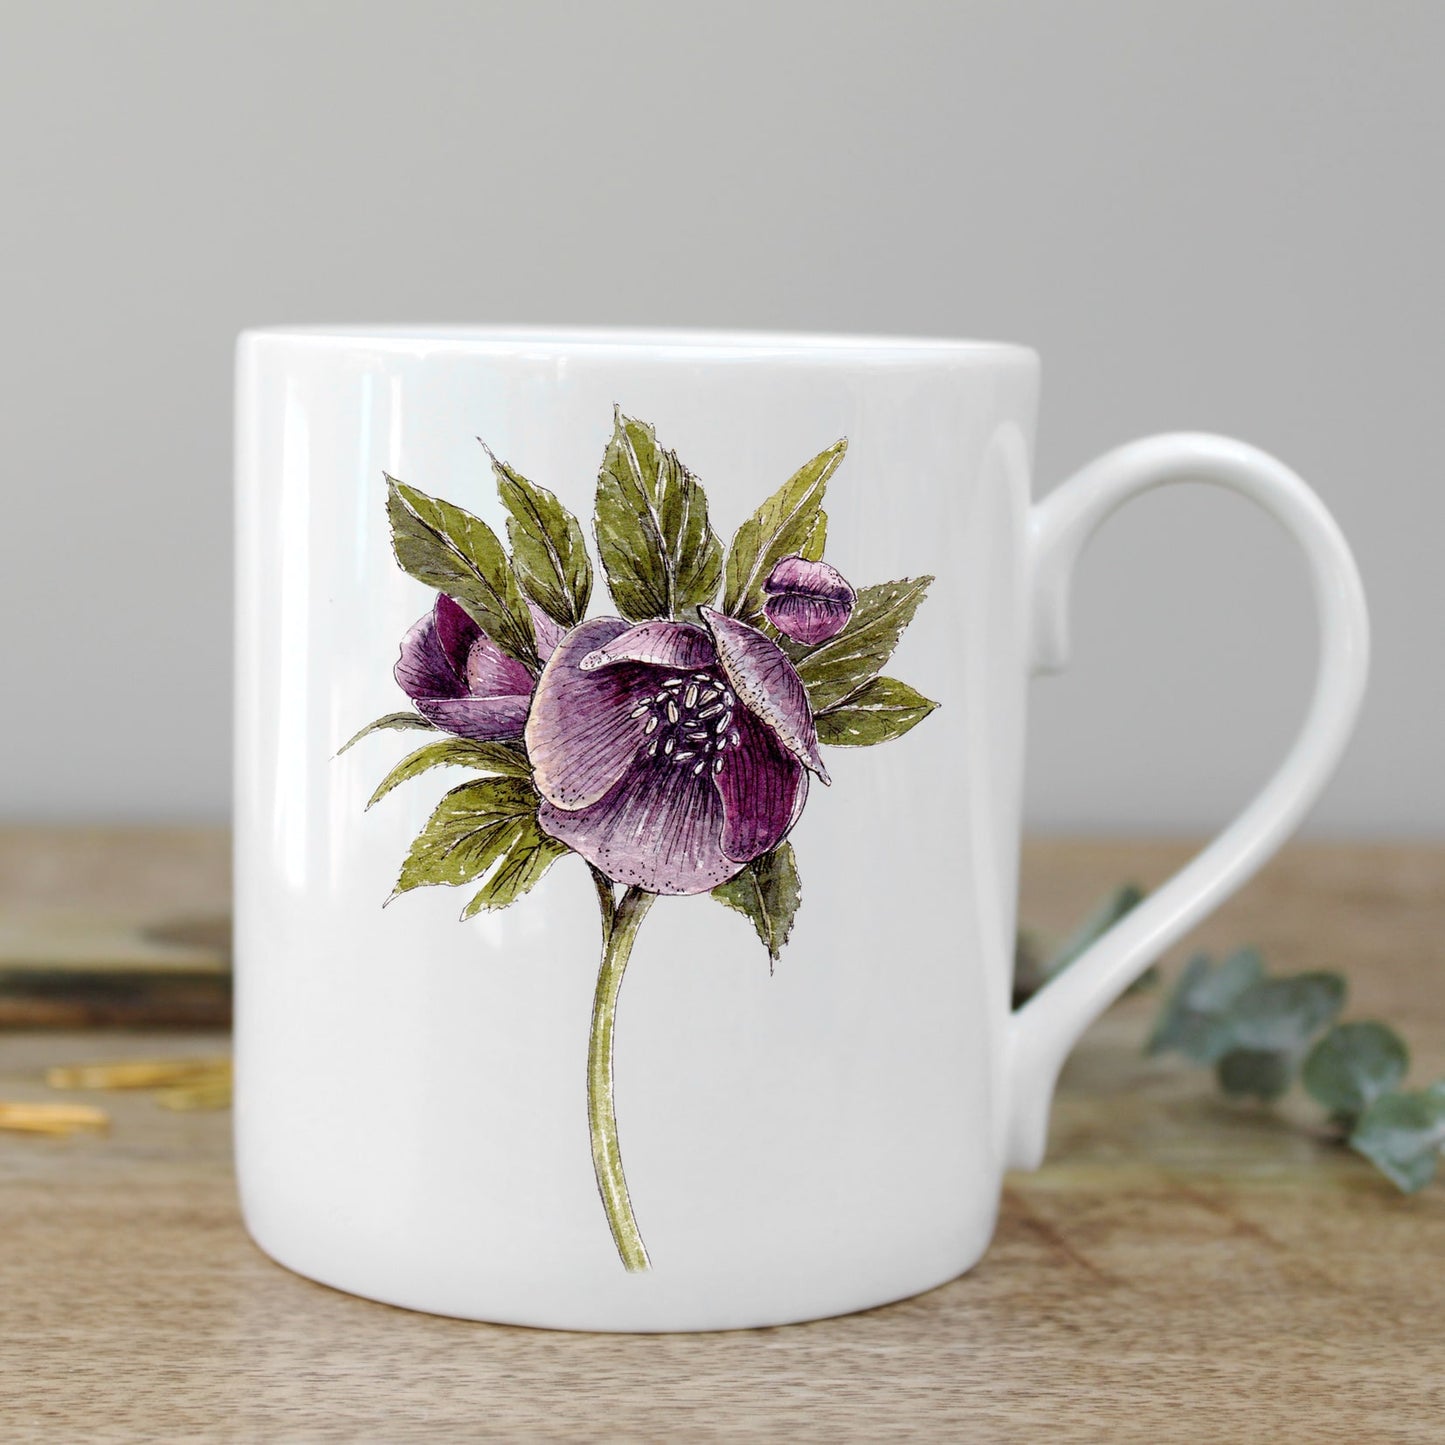 White mug with an illustration of a hellebore flower on it. Photographed on a wooden surface.